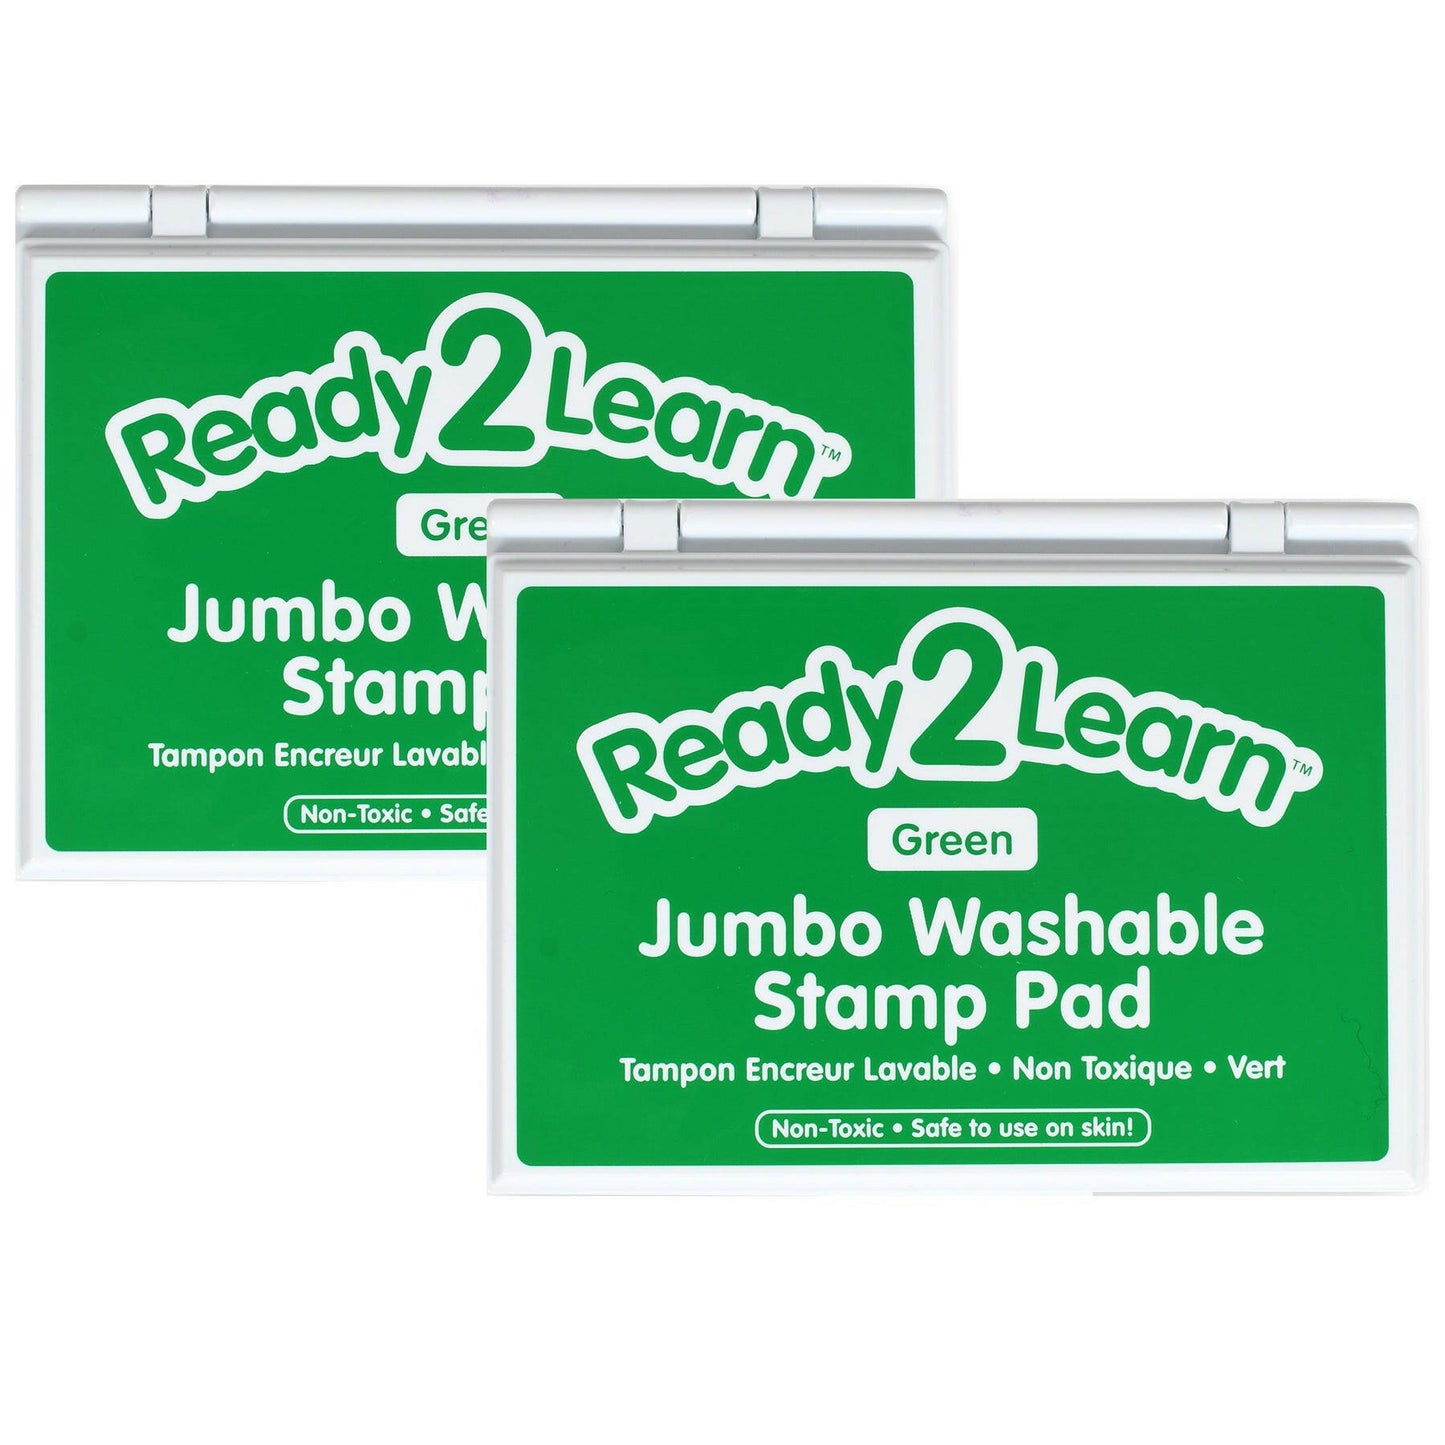 Jumbo Washable Stamp Pad - Green - 6.2"L x 4.1"W - Pack of 2